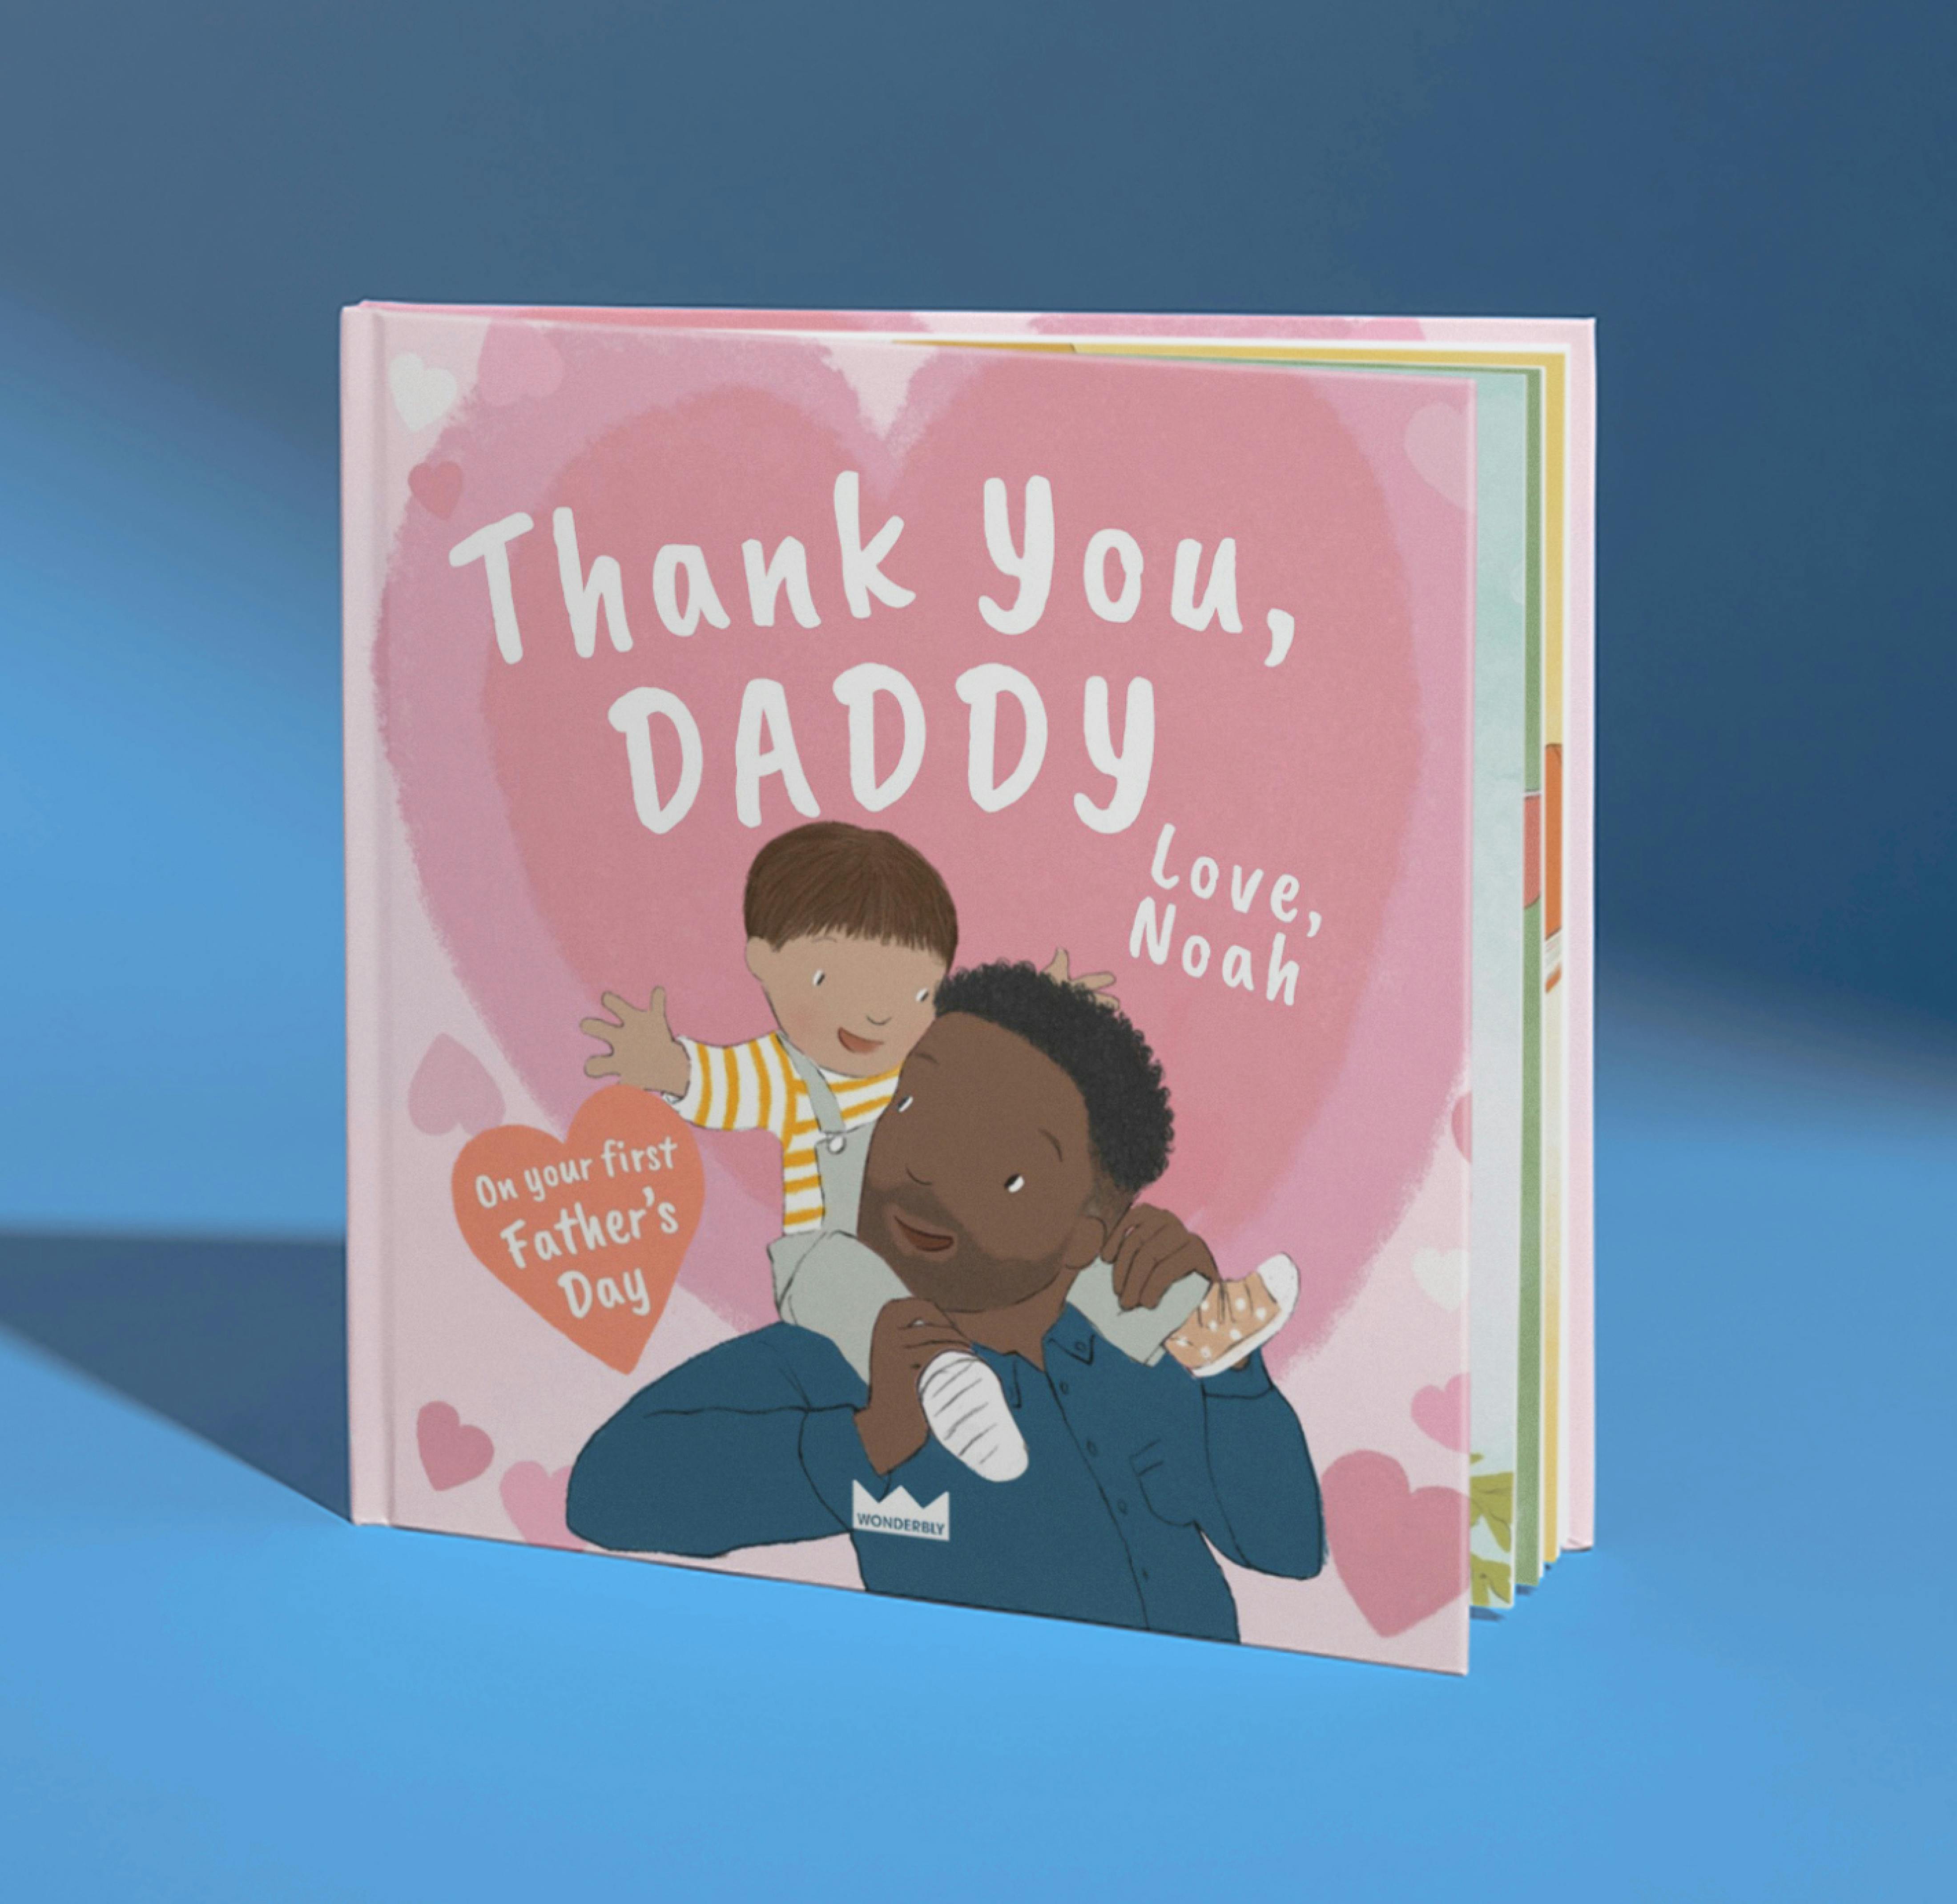 special edition cover with heart that says 'on your first father's day' 